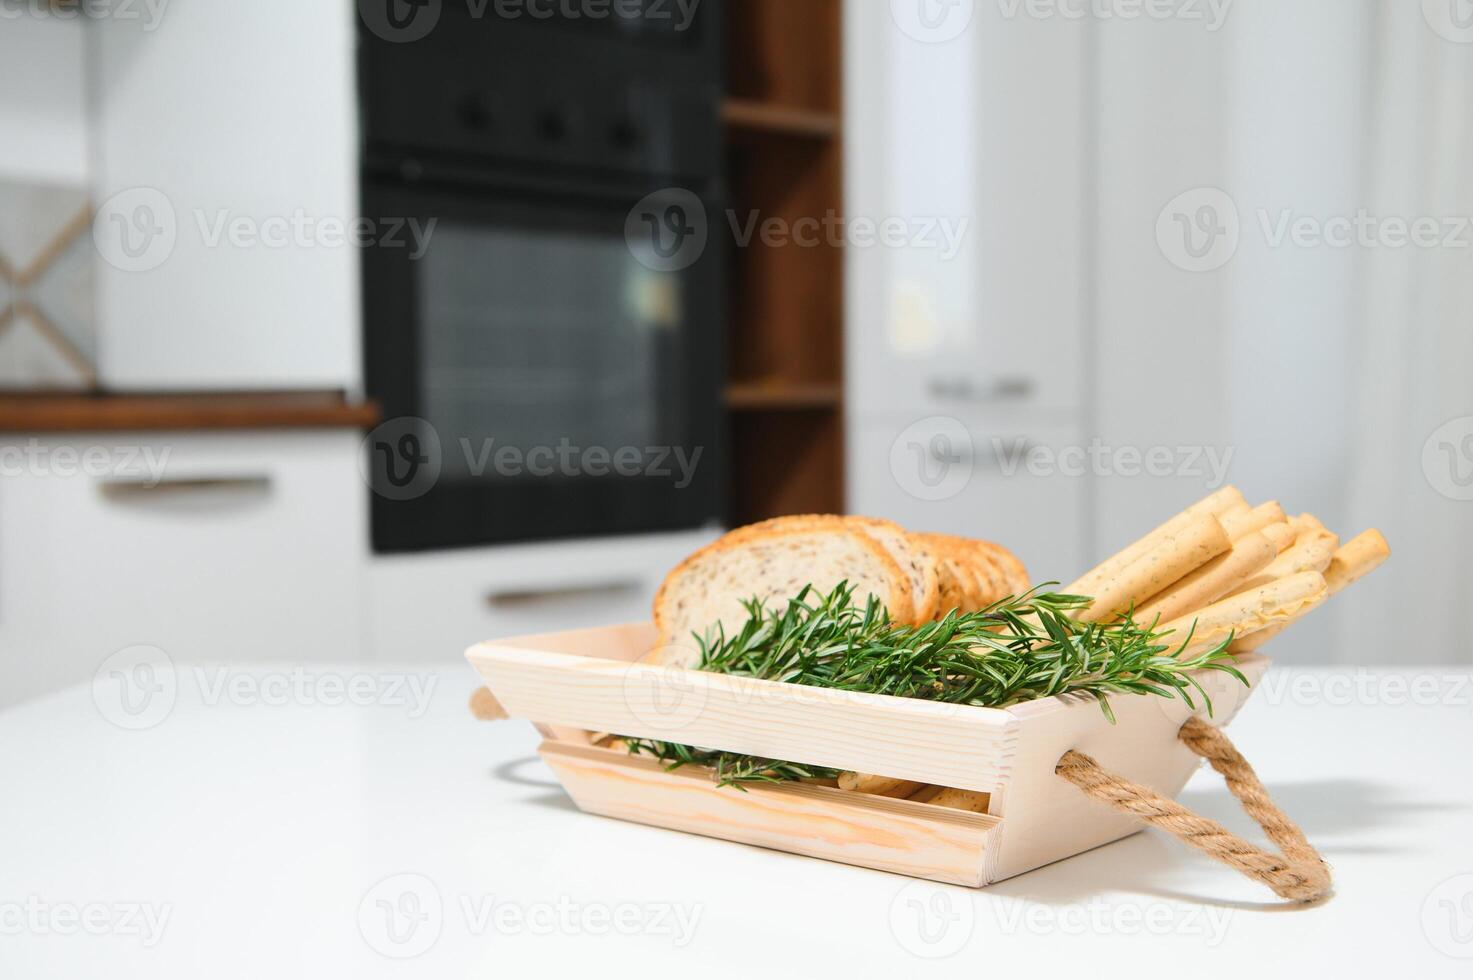 Craft wooden plate for storing bread or vegetables in the kitchen photo